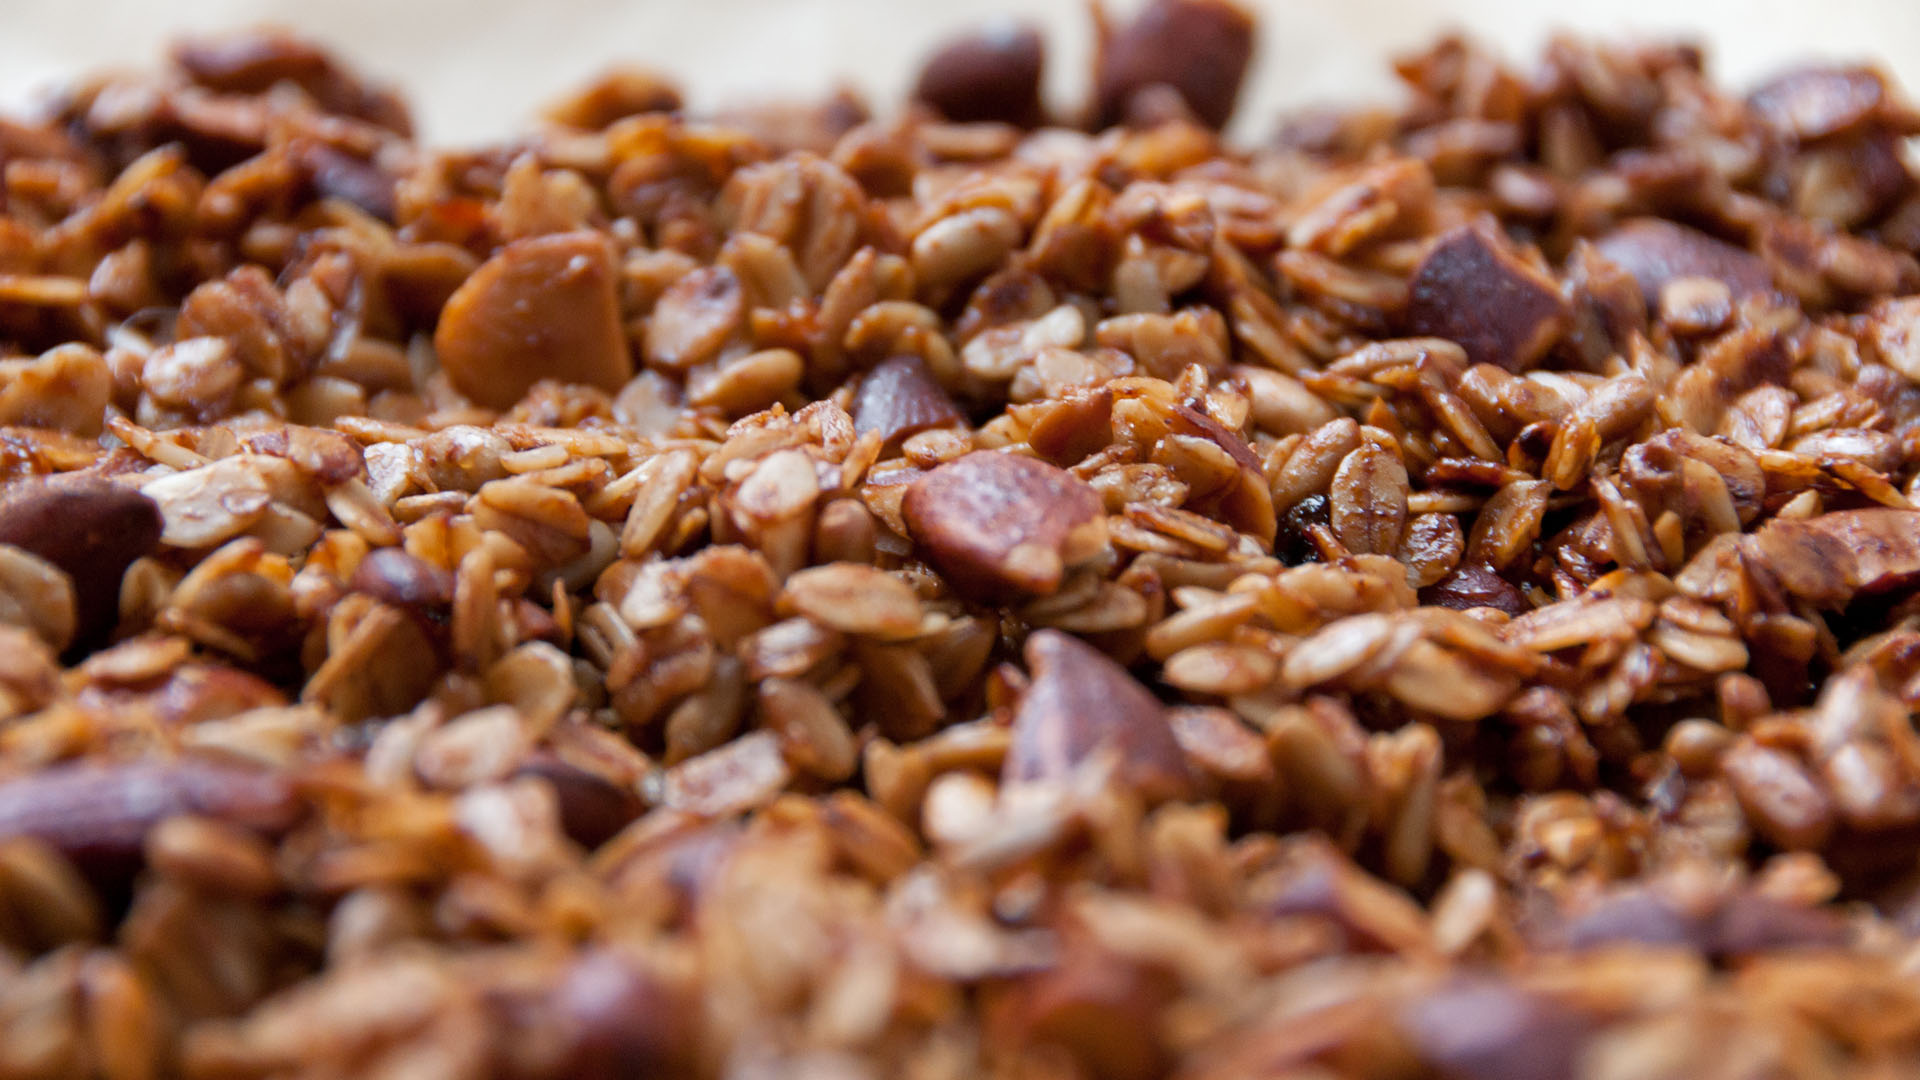 Carlin Greenstein shares her recipe for Manu's Granola with Foodadit